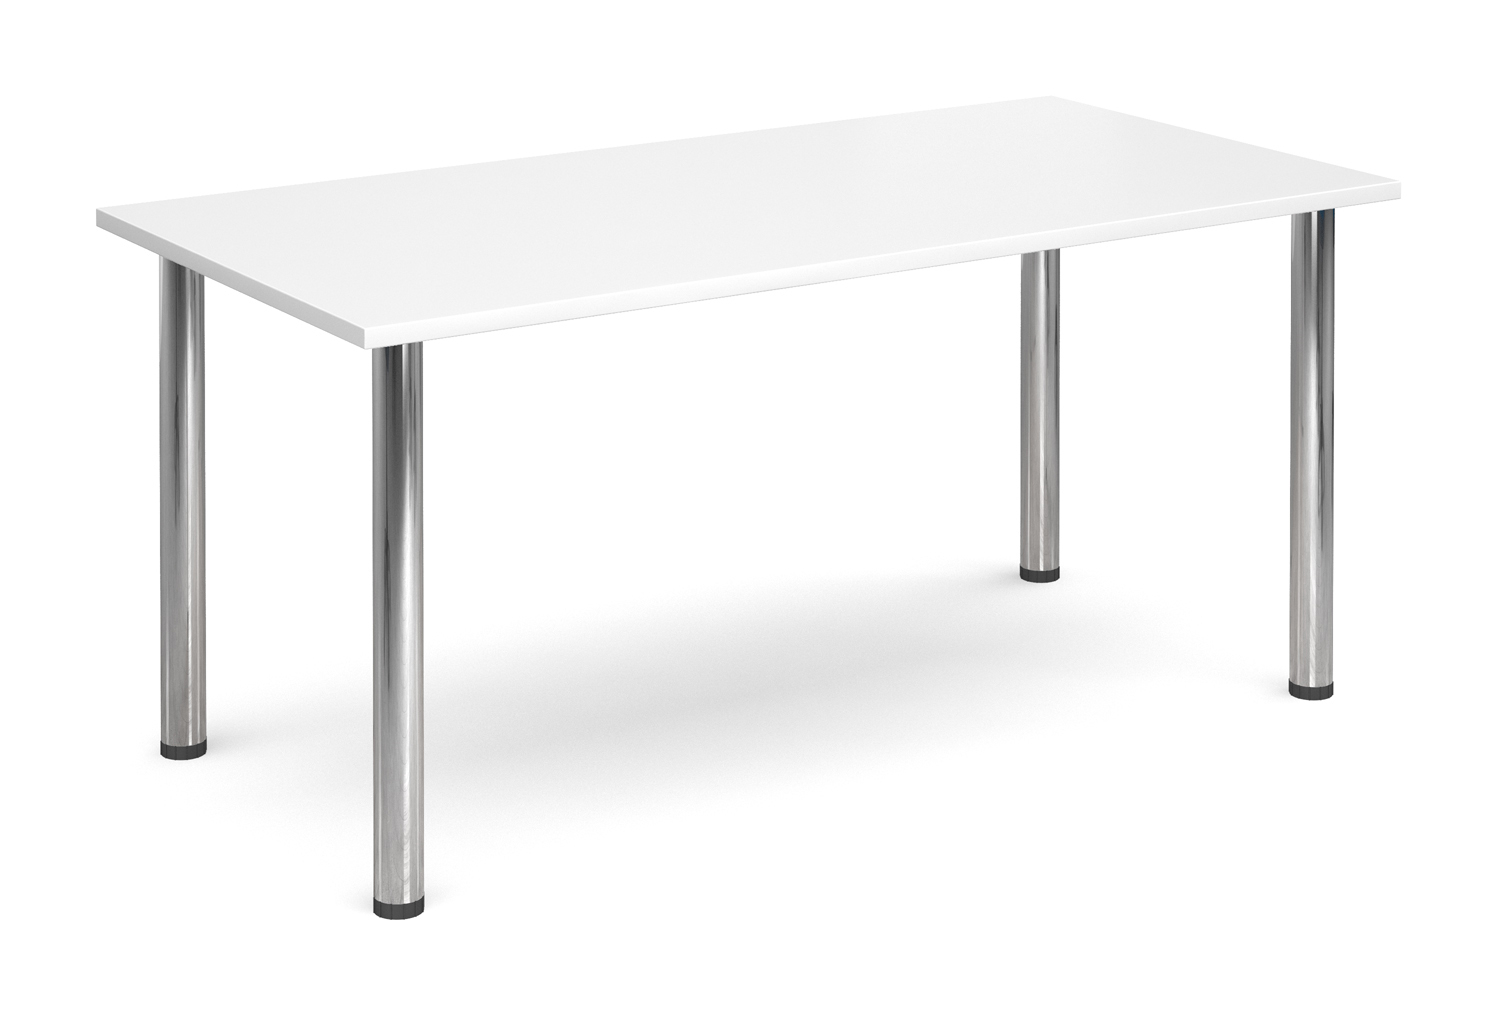 Pallas Rectangular Meeting Table, 160wx80dx73h (cm), Silver Frame, White, Express Delivery